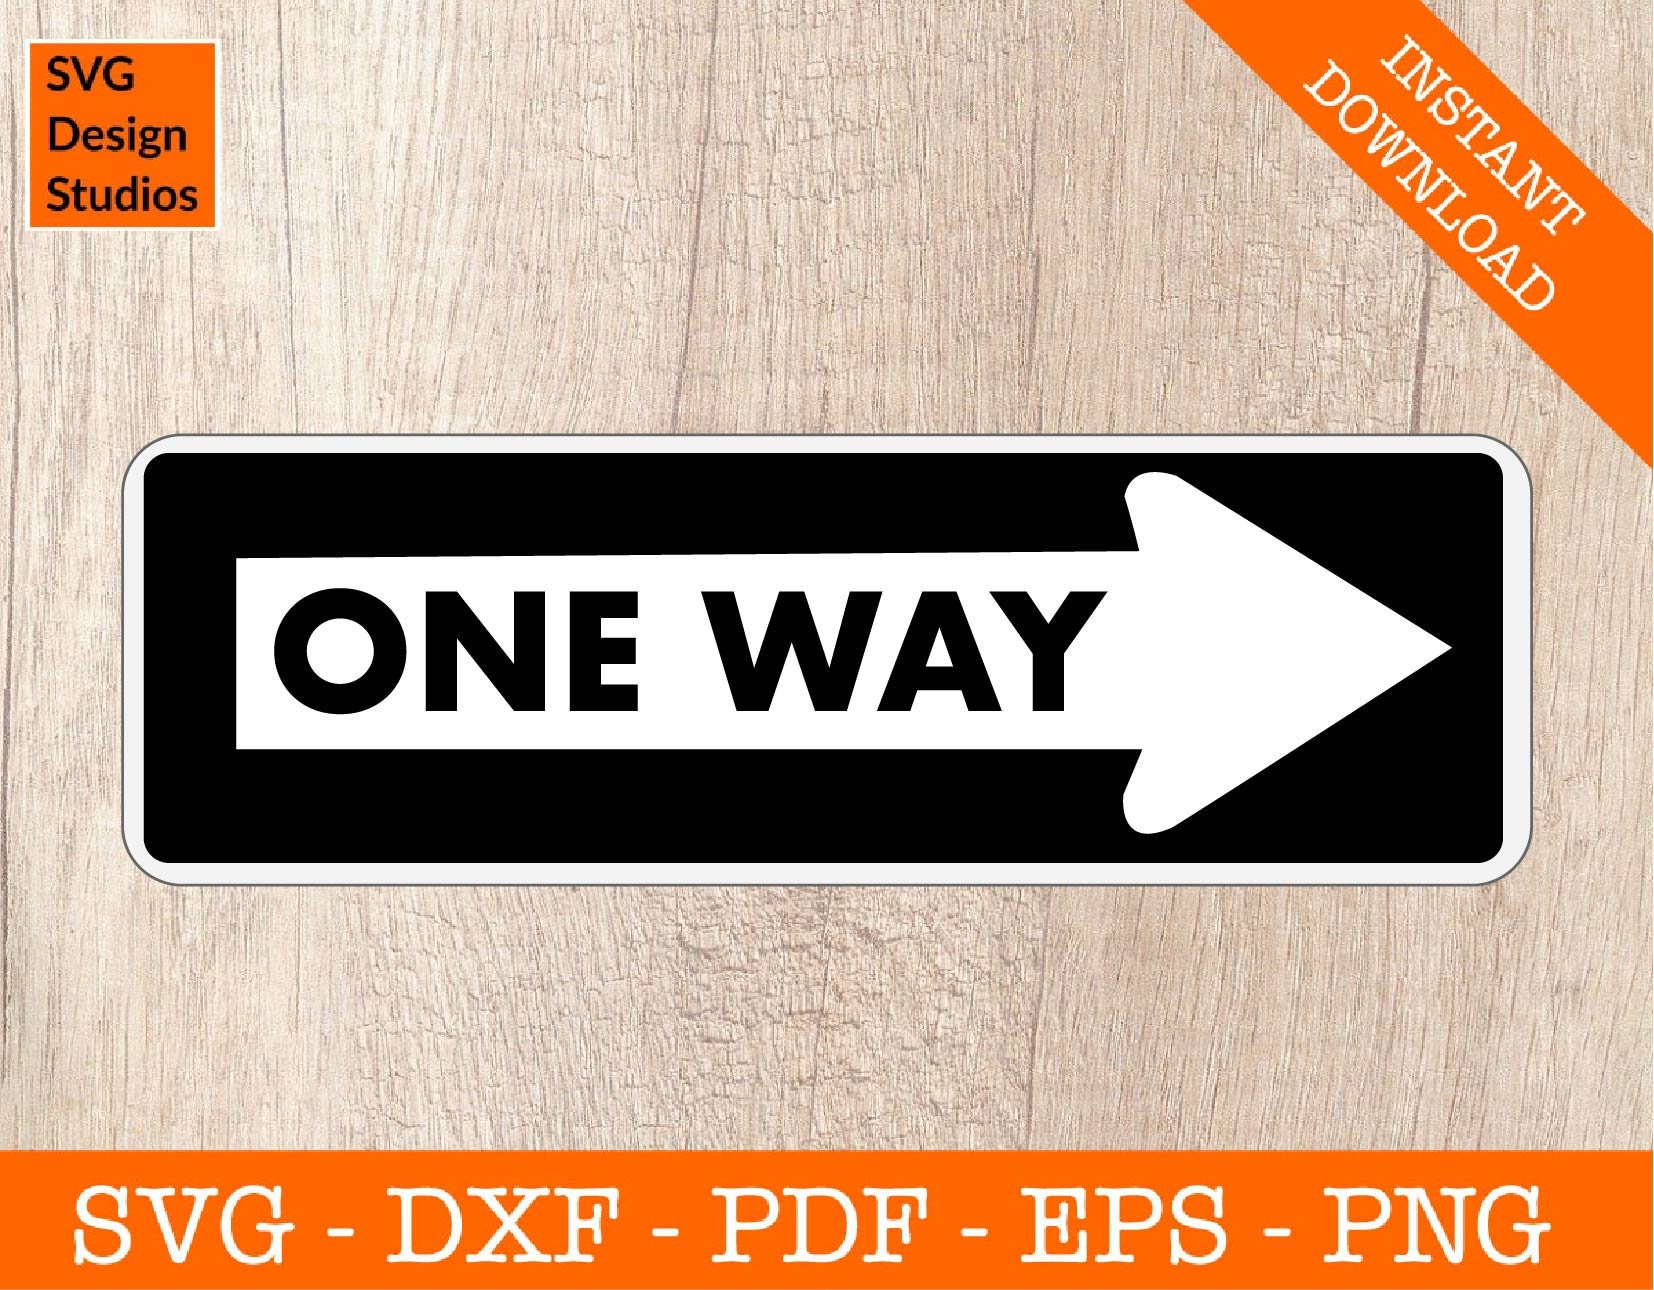 One Way Road Sign Svg Silhouette SVG Cut File - PNG - DXF - Cricut ...